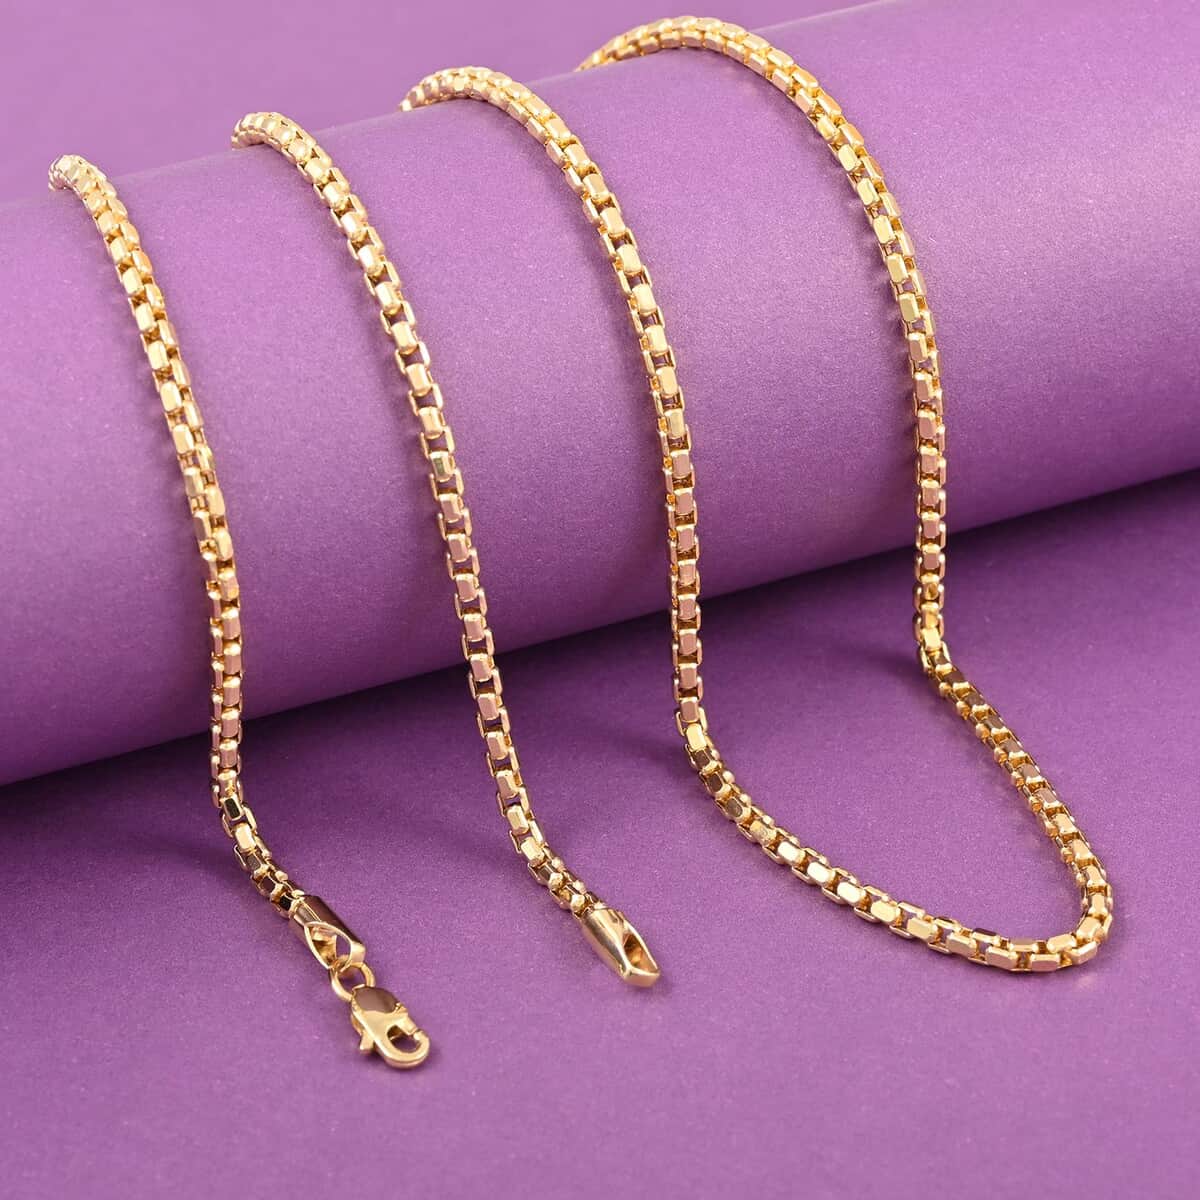 California Closeout Deal 10K Yellow Gold 2.5mm Venetian Box Chain Necklace 22 Inches 6.0Grams image number 1